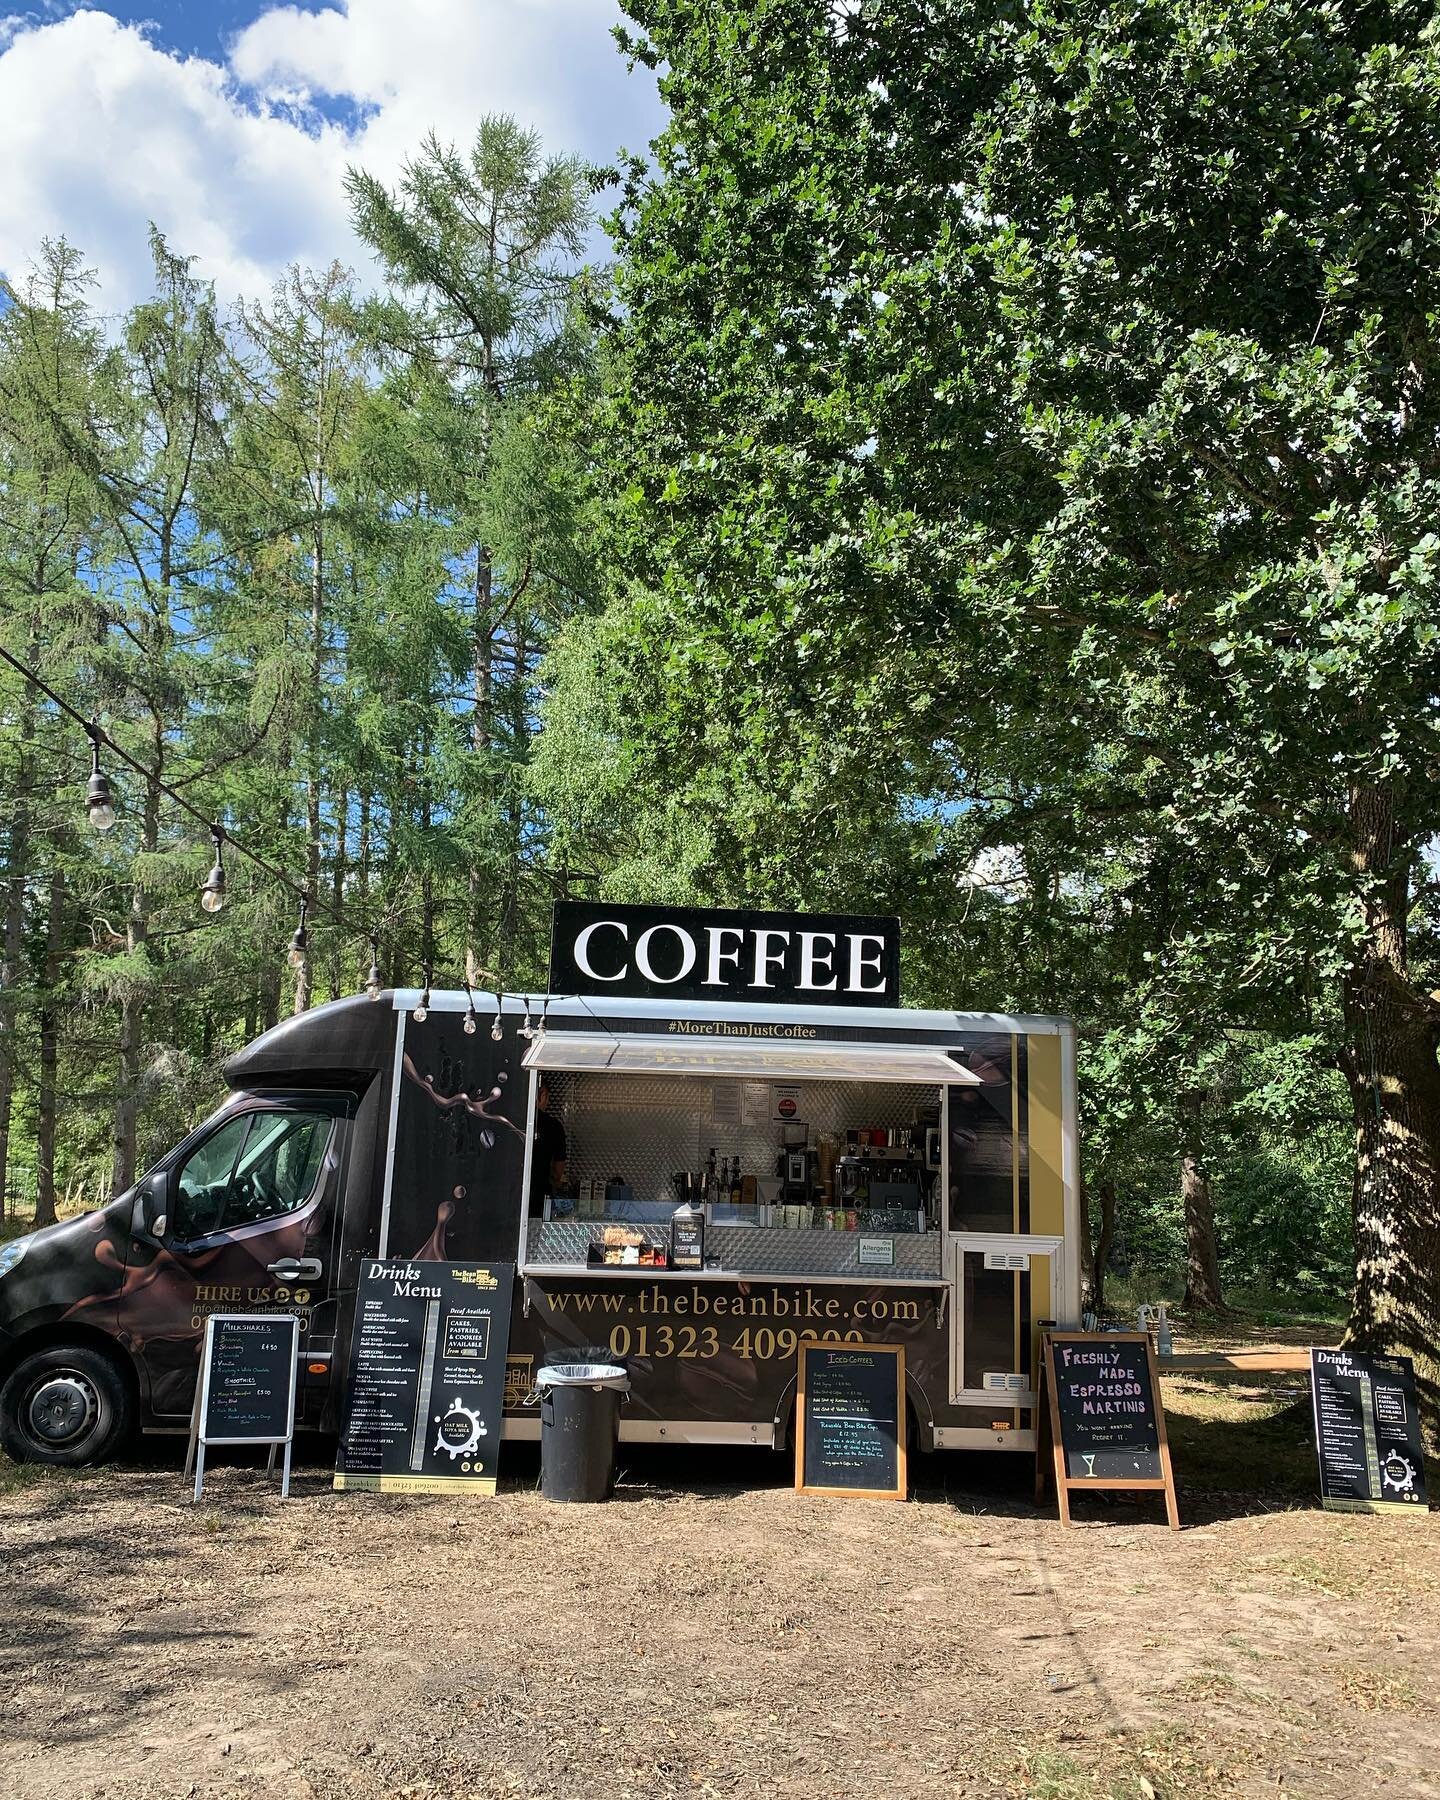 Come and find us at @goodvibrationssociety this weekend! Serving barista hot drinks, breakfast baps, milkshakes, pastries, espresso martinis and much more! ☕️ 🍸 🥪 🥐